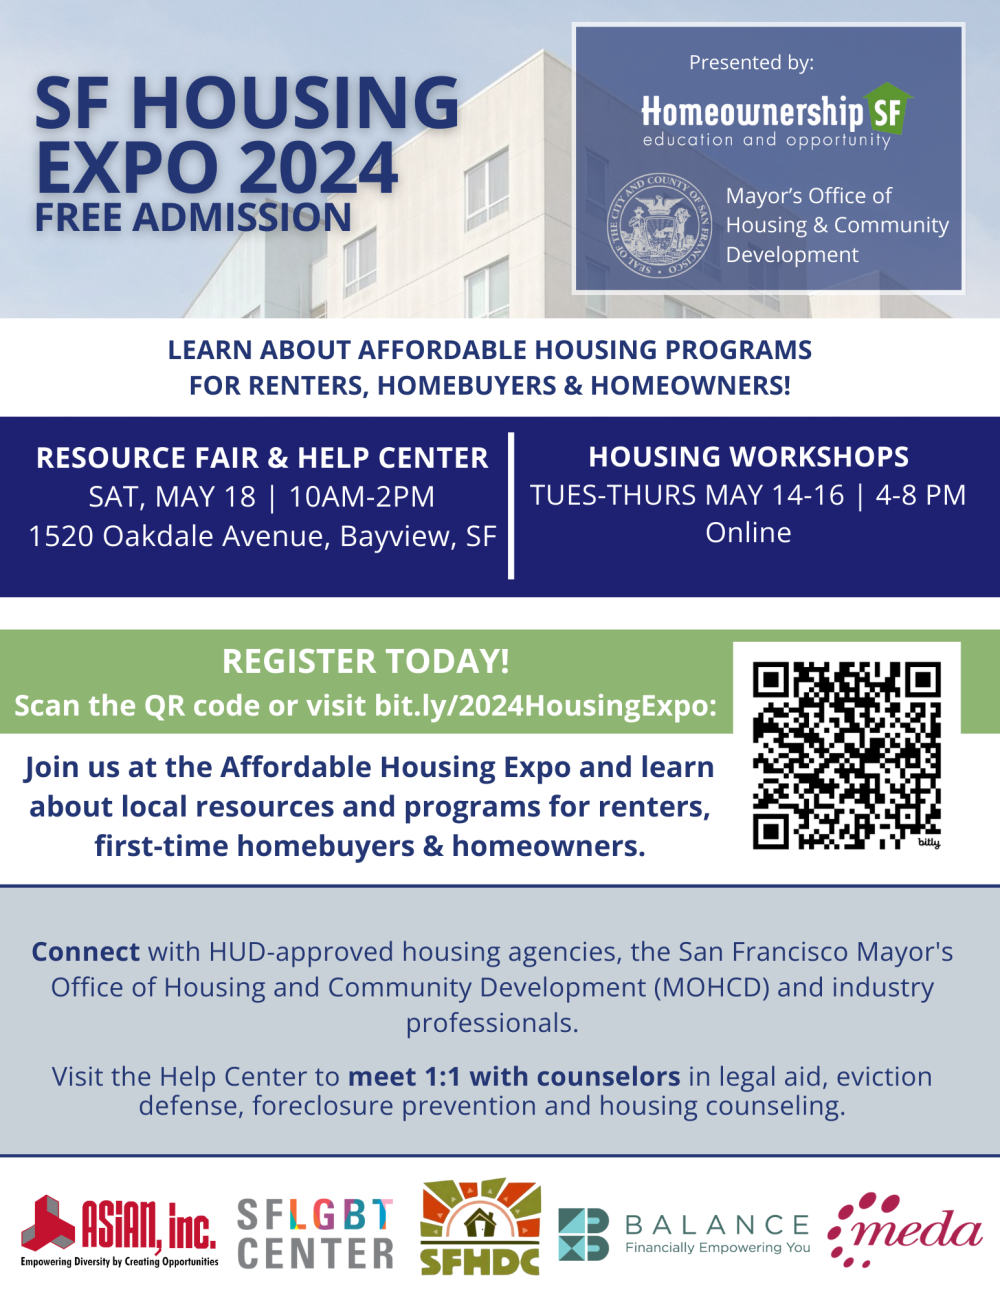 Poster with additional information about the Housing Expo 2024; information is duplicated on the event page.